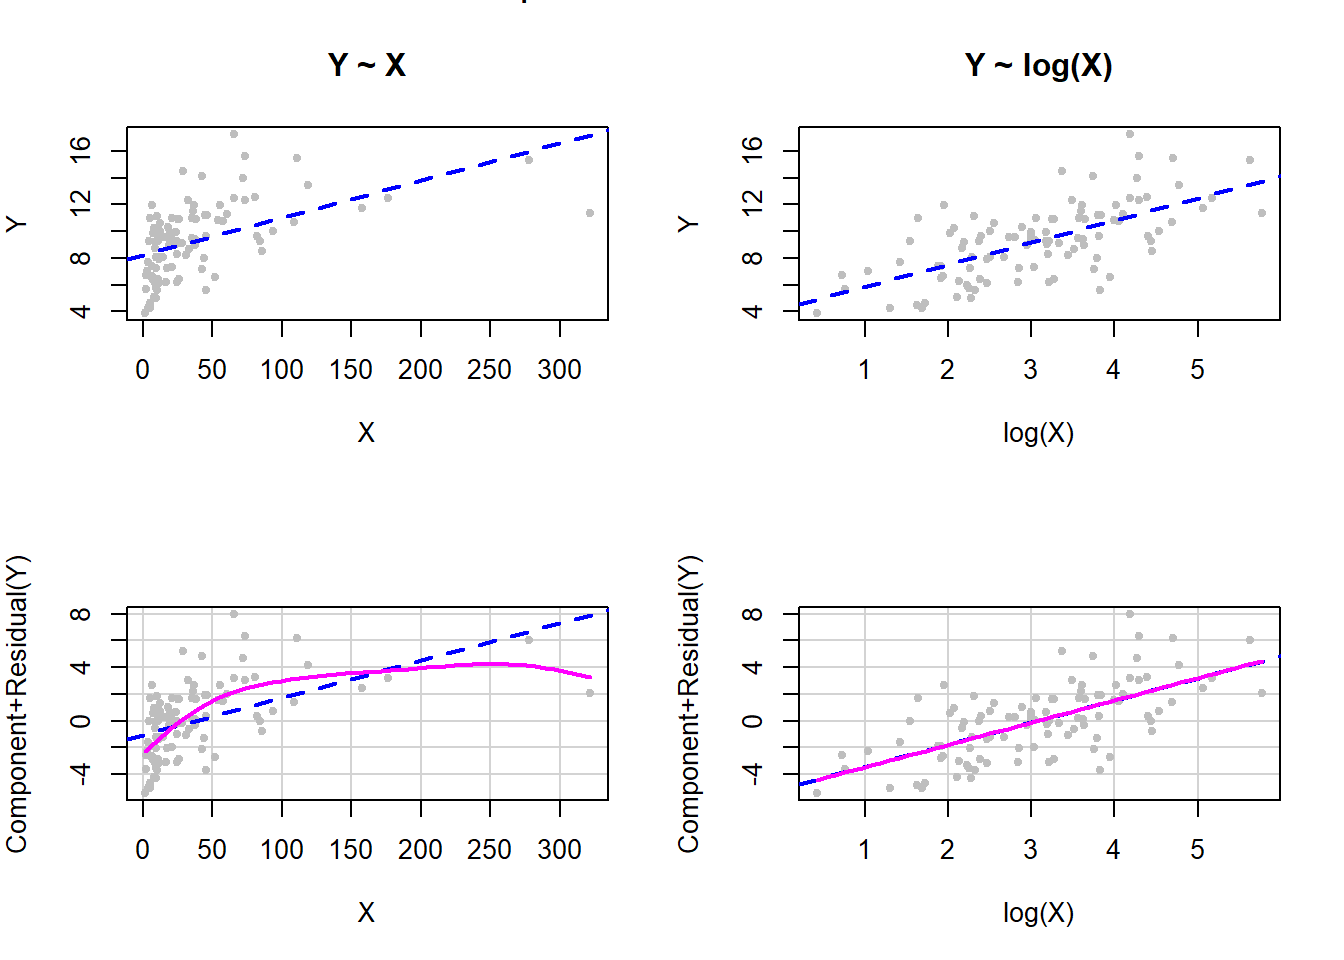 Log transformation of X to fix non-linearity